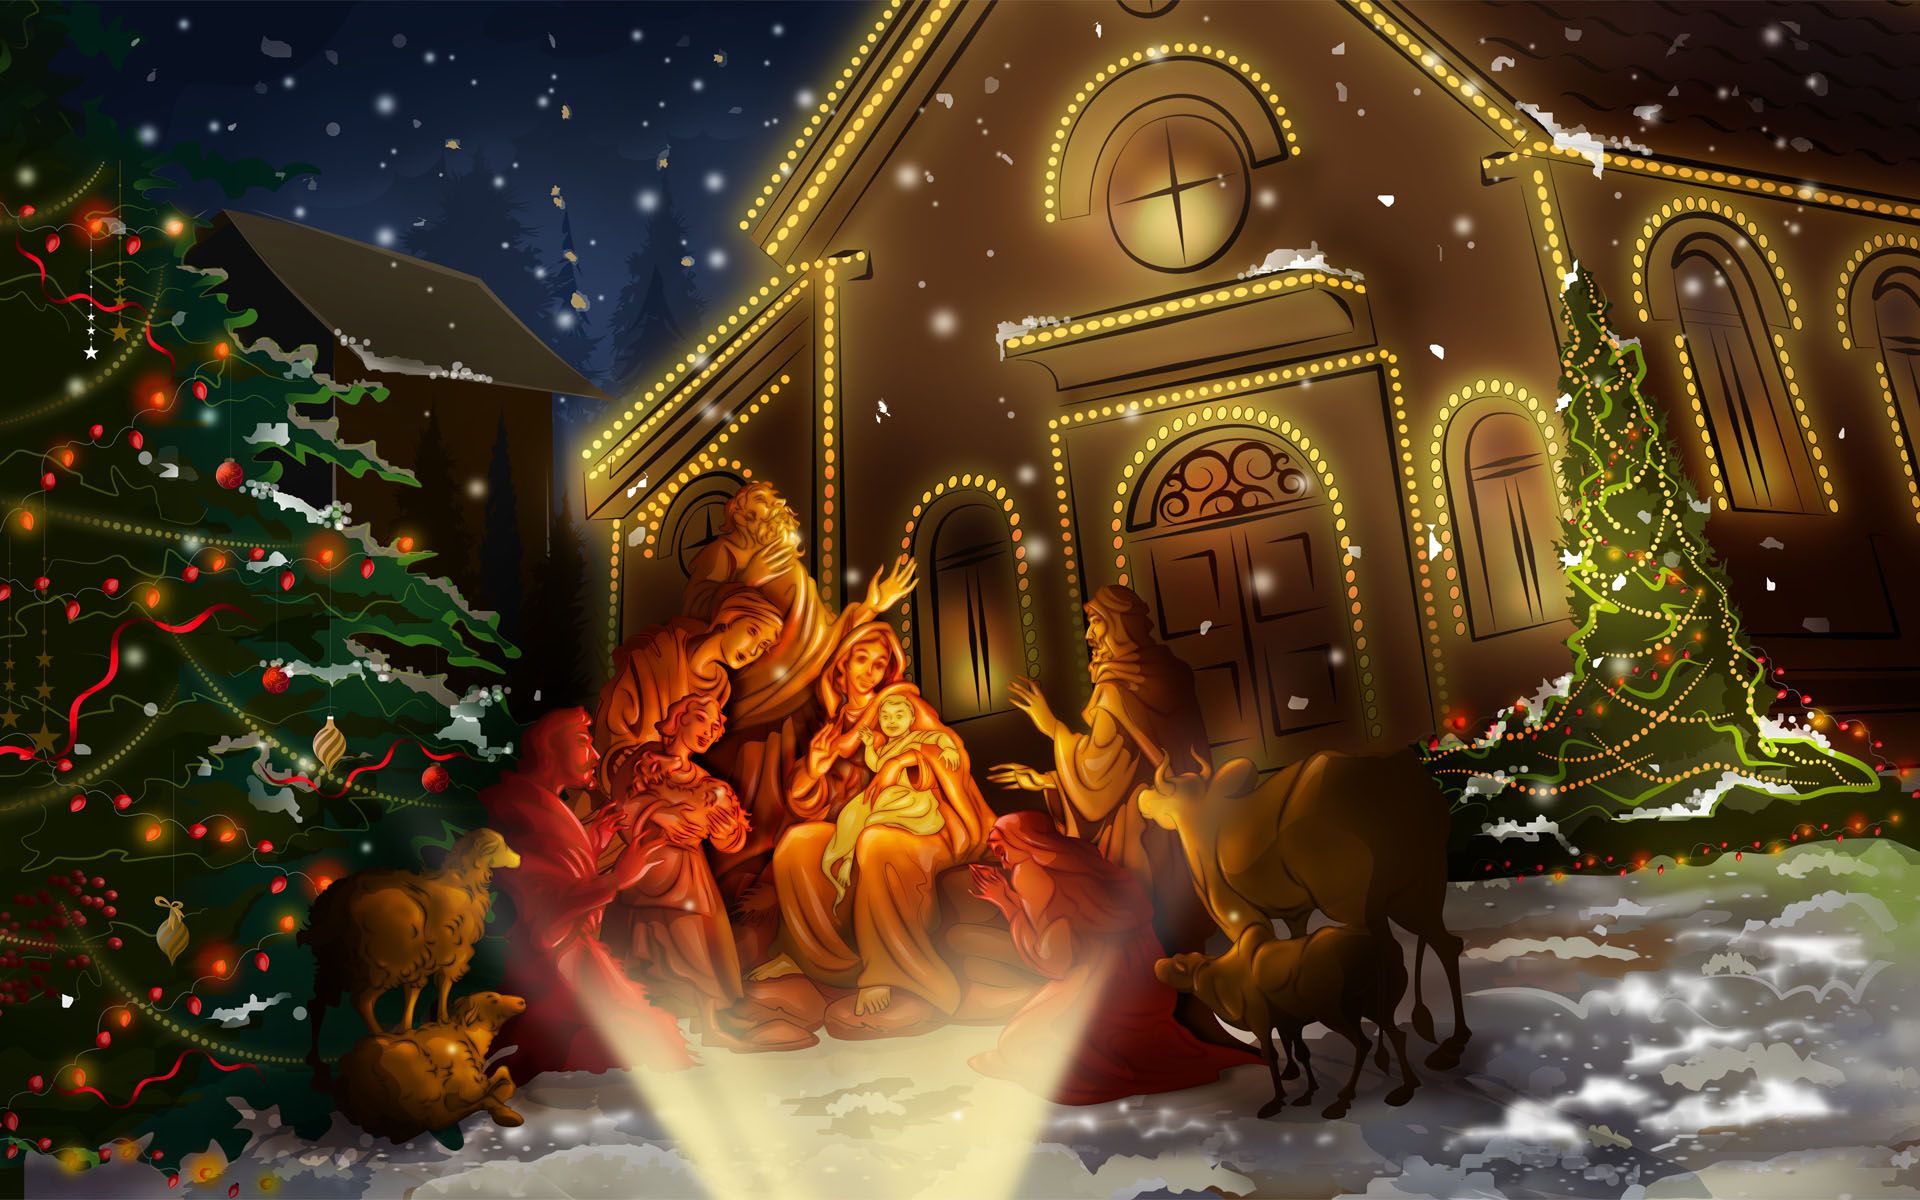 Marry Christmas Christ Is Born - HD Wallpaper 